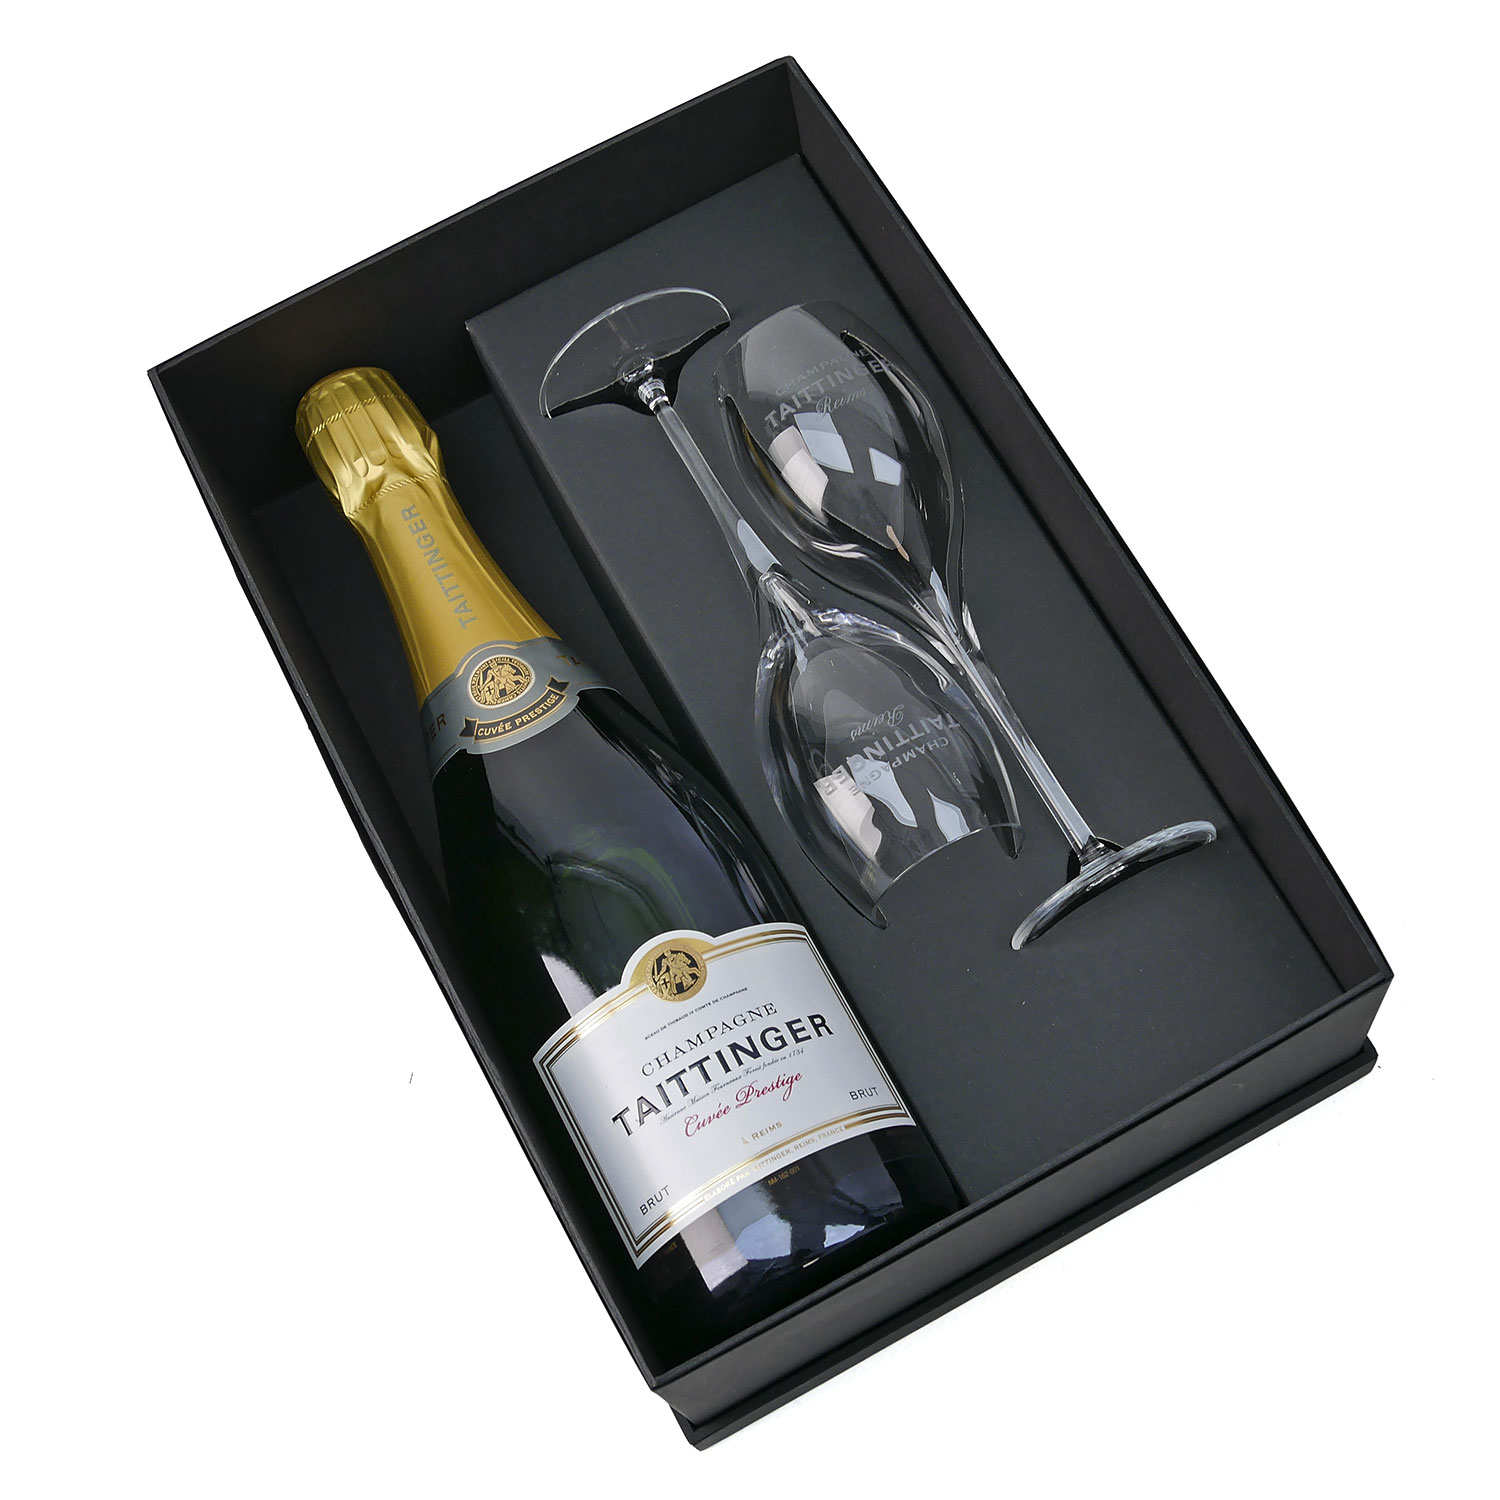 Champagne brut, a set of 2 bottles in their box: a Moët …